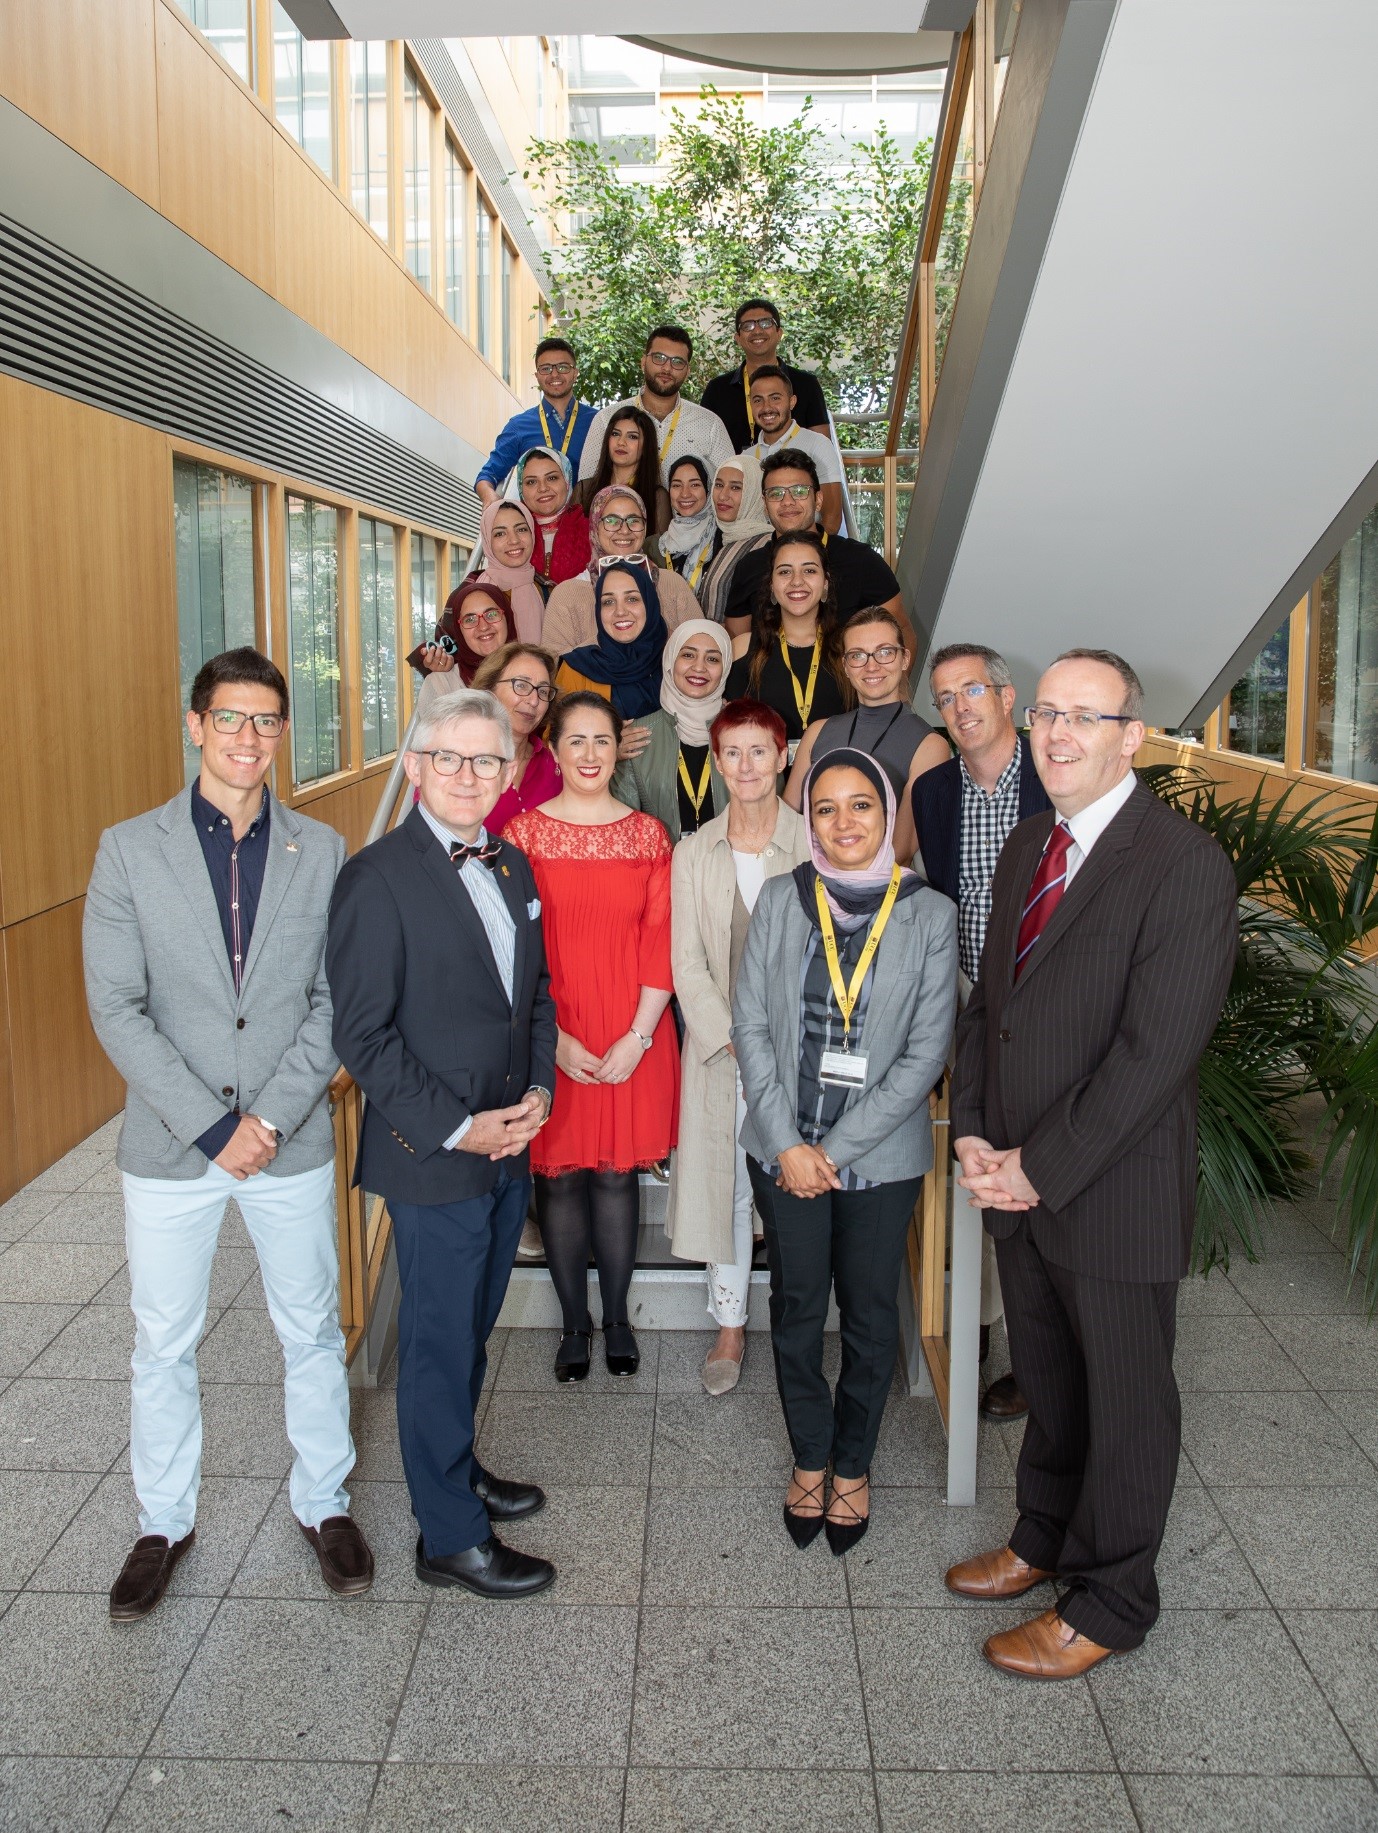 The School of Pharmacy at UCC welcomes students to its third International Summer School